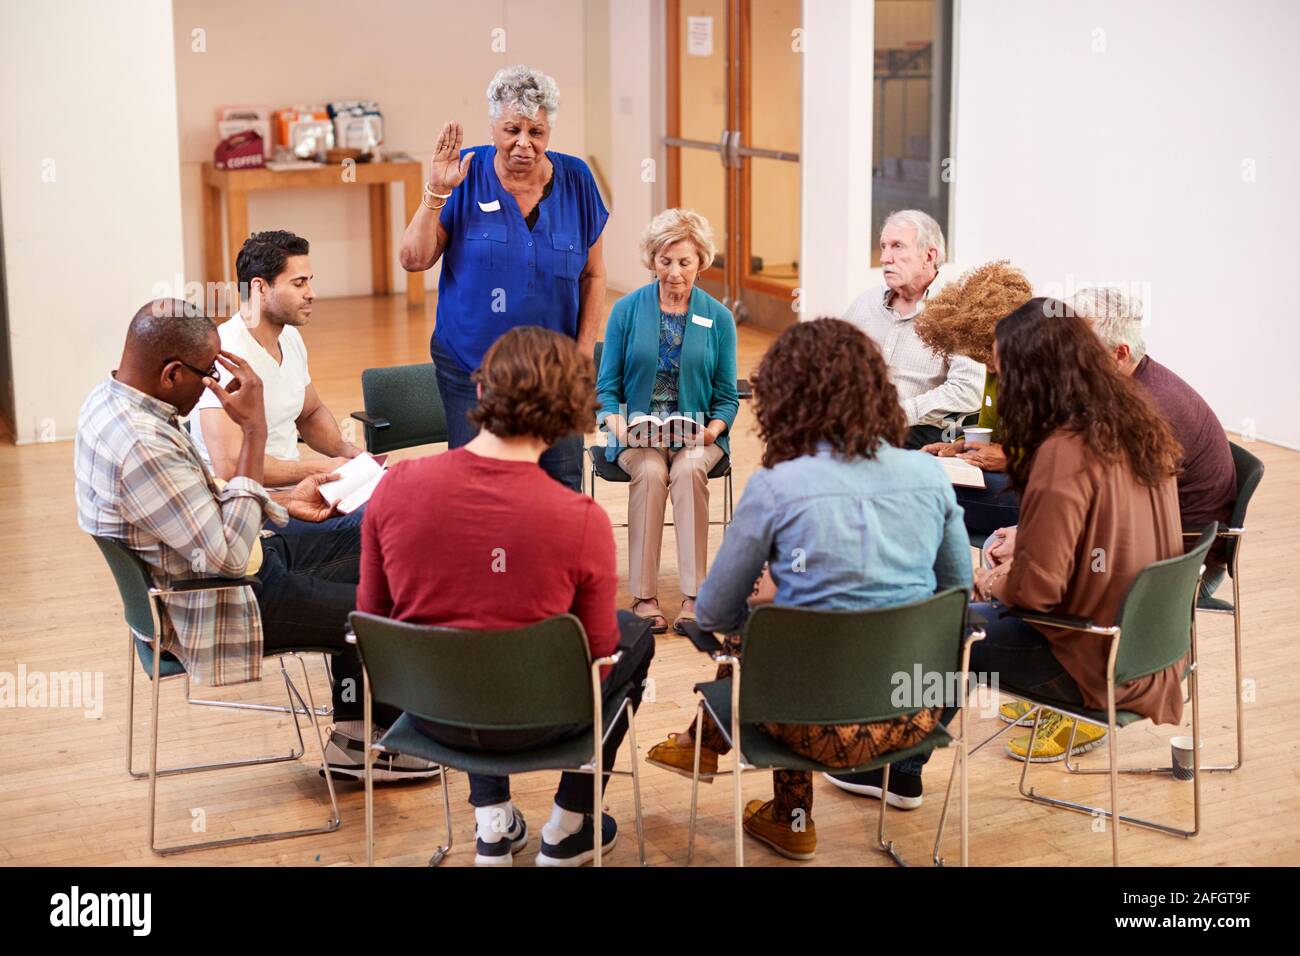 People Attending Bible Study Group Meeting In Community Center Stock Photo